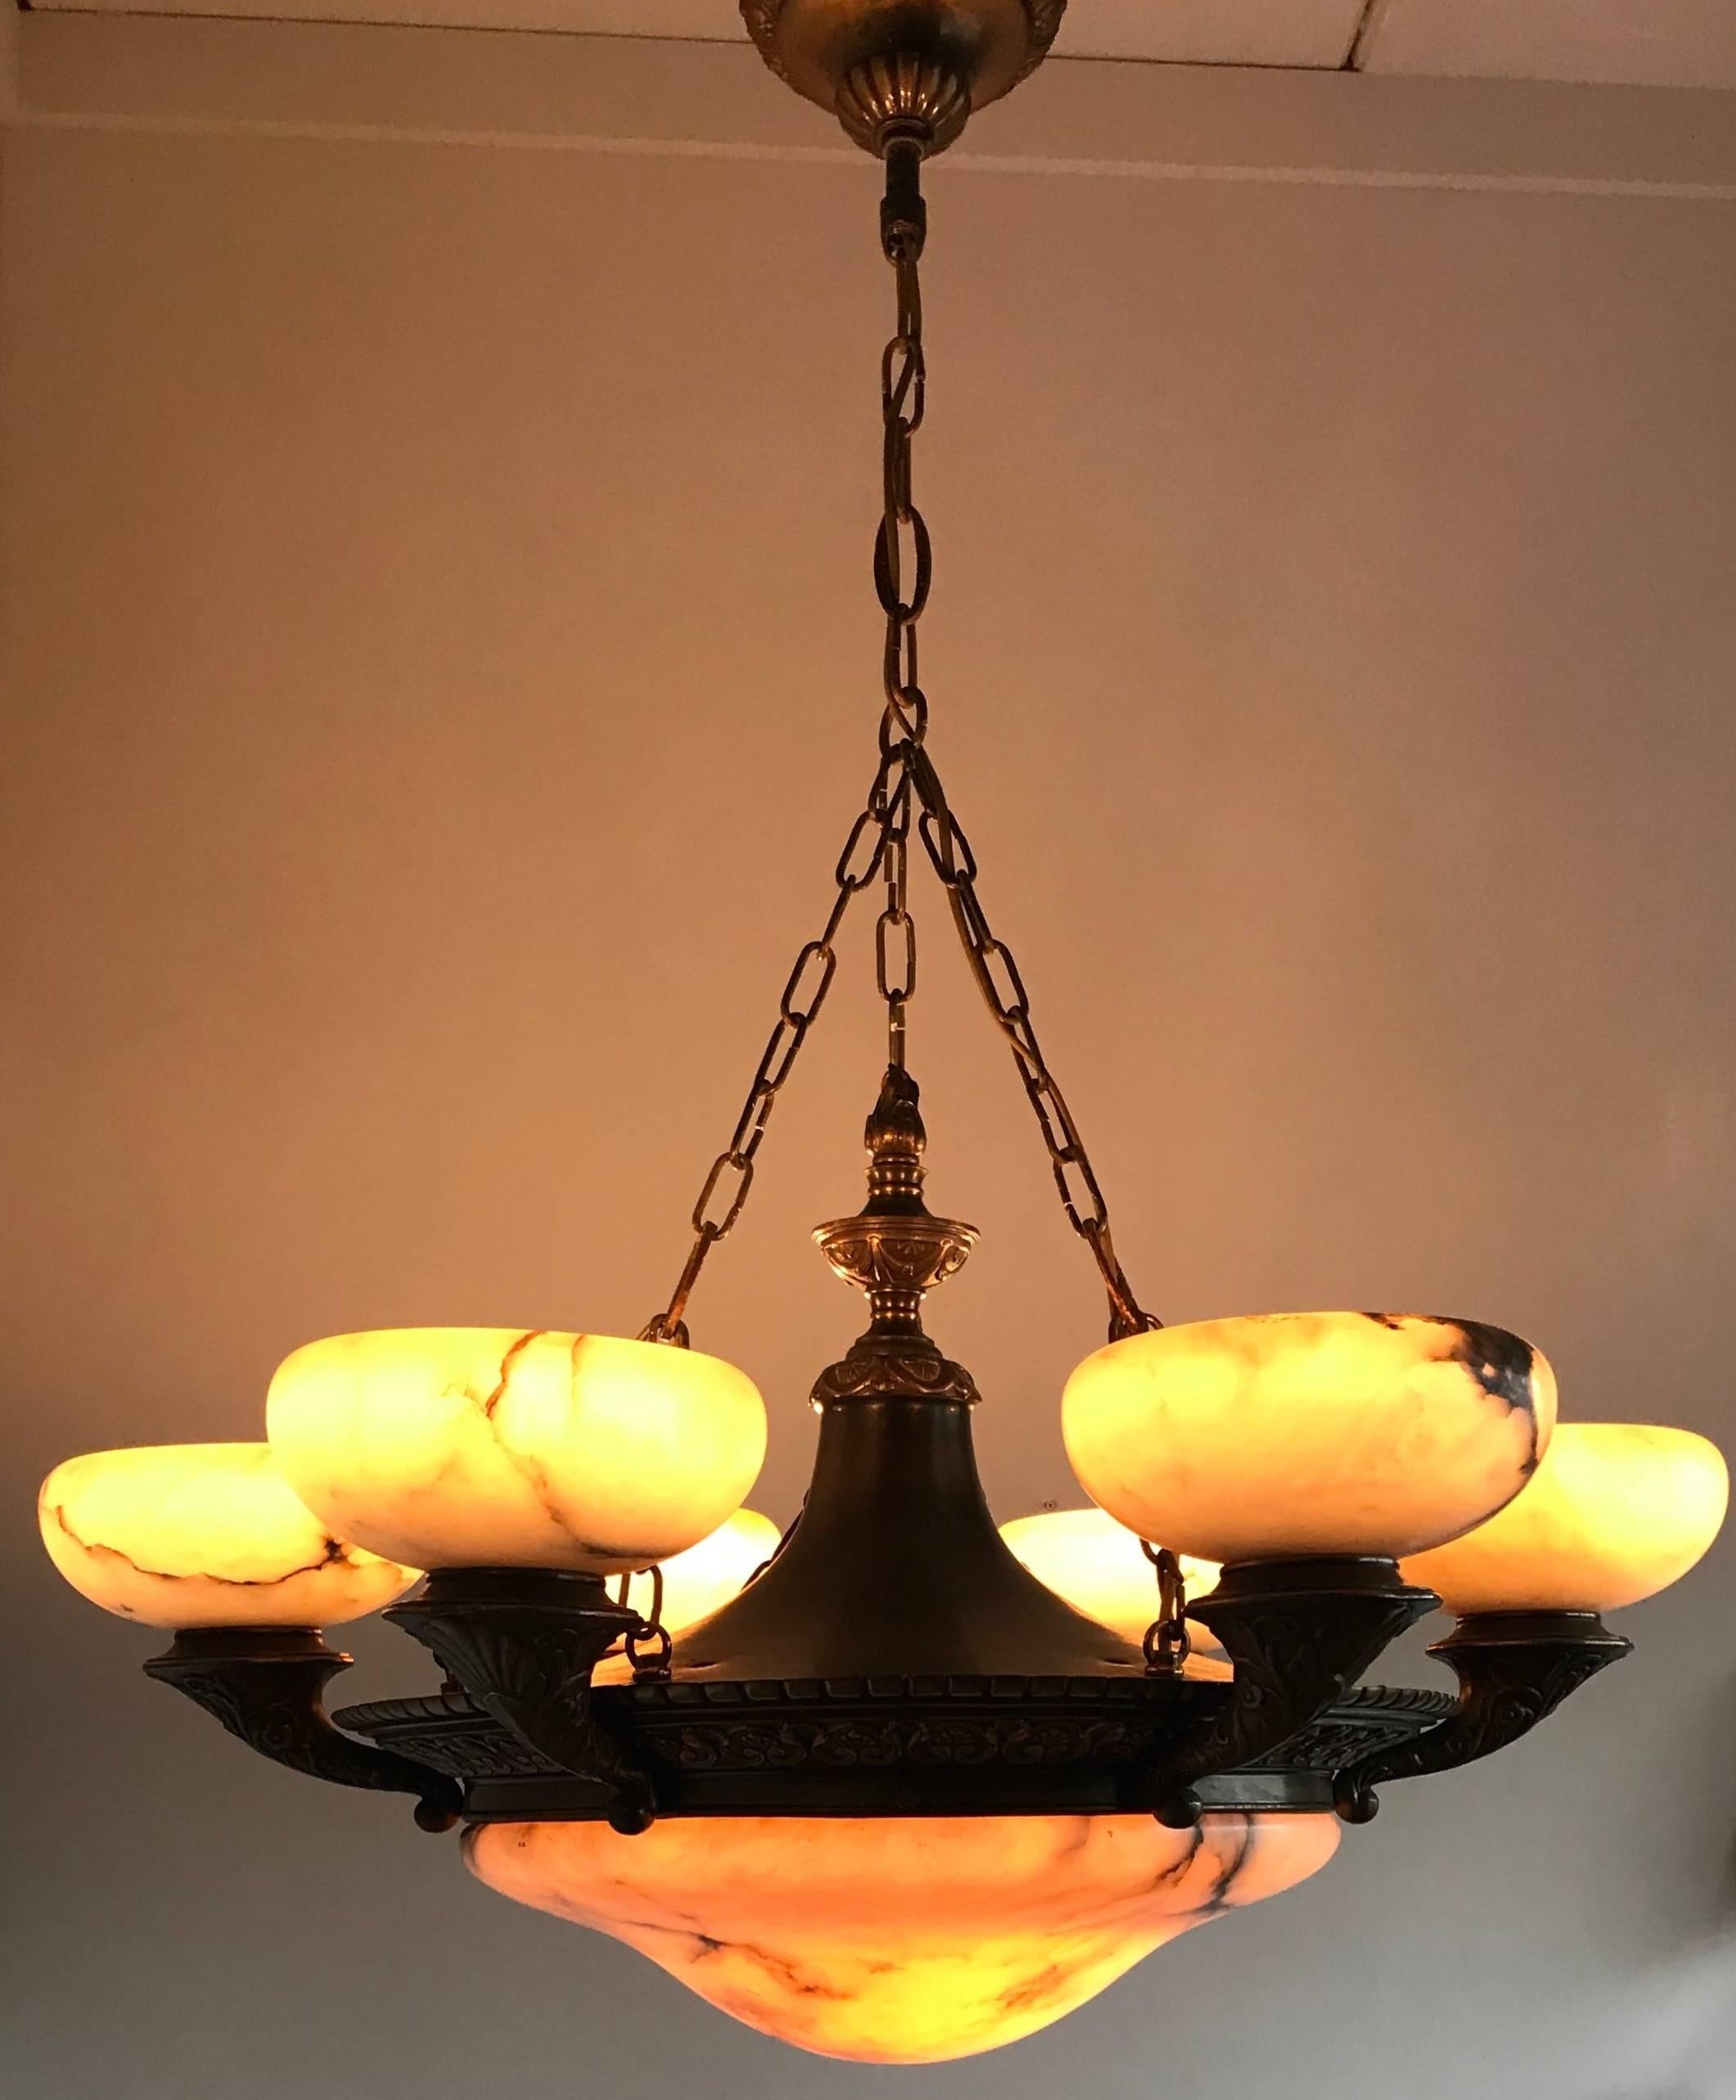 Top & Large quality, early 1900s italian chandelier. 

This stunning and large, thick alabaster and bronze chandelier will light up your day every time you look at it. All bronze Egyptian revival style elements give this impressive chandelier an